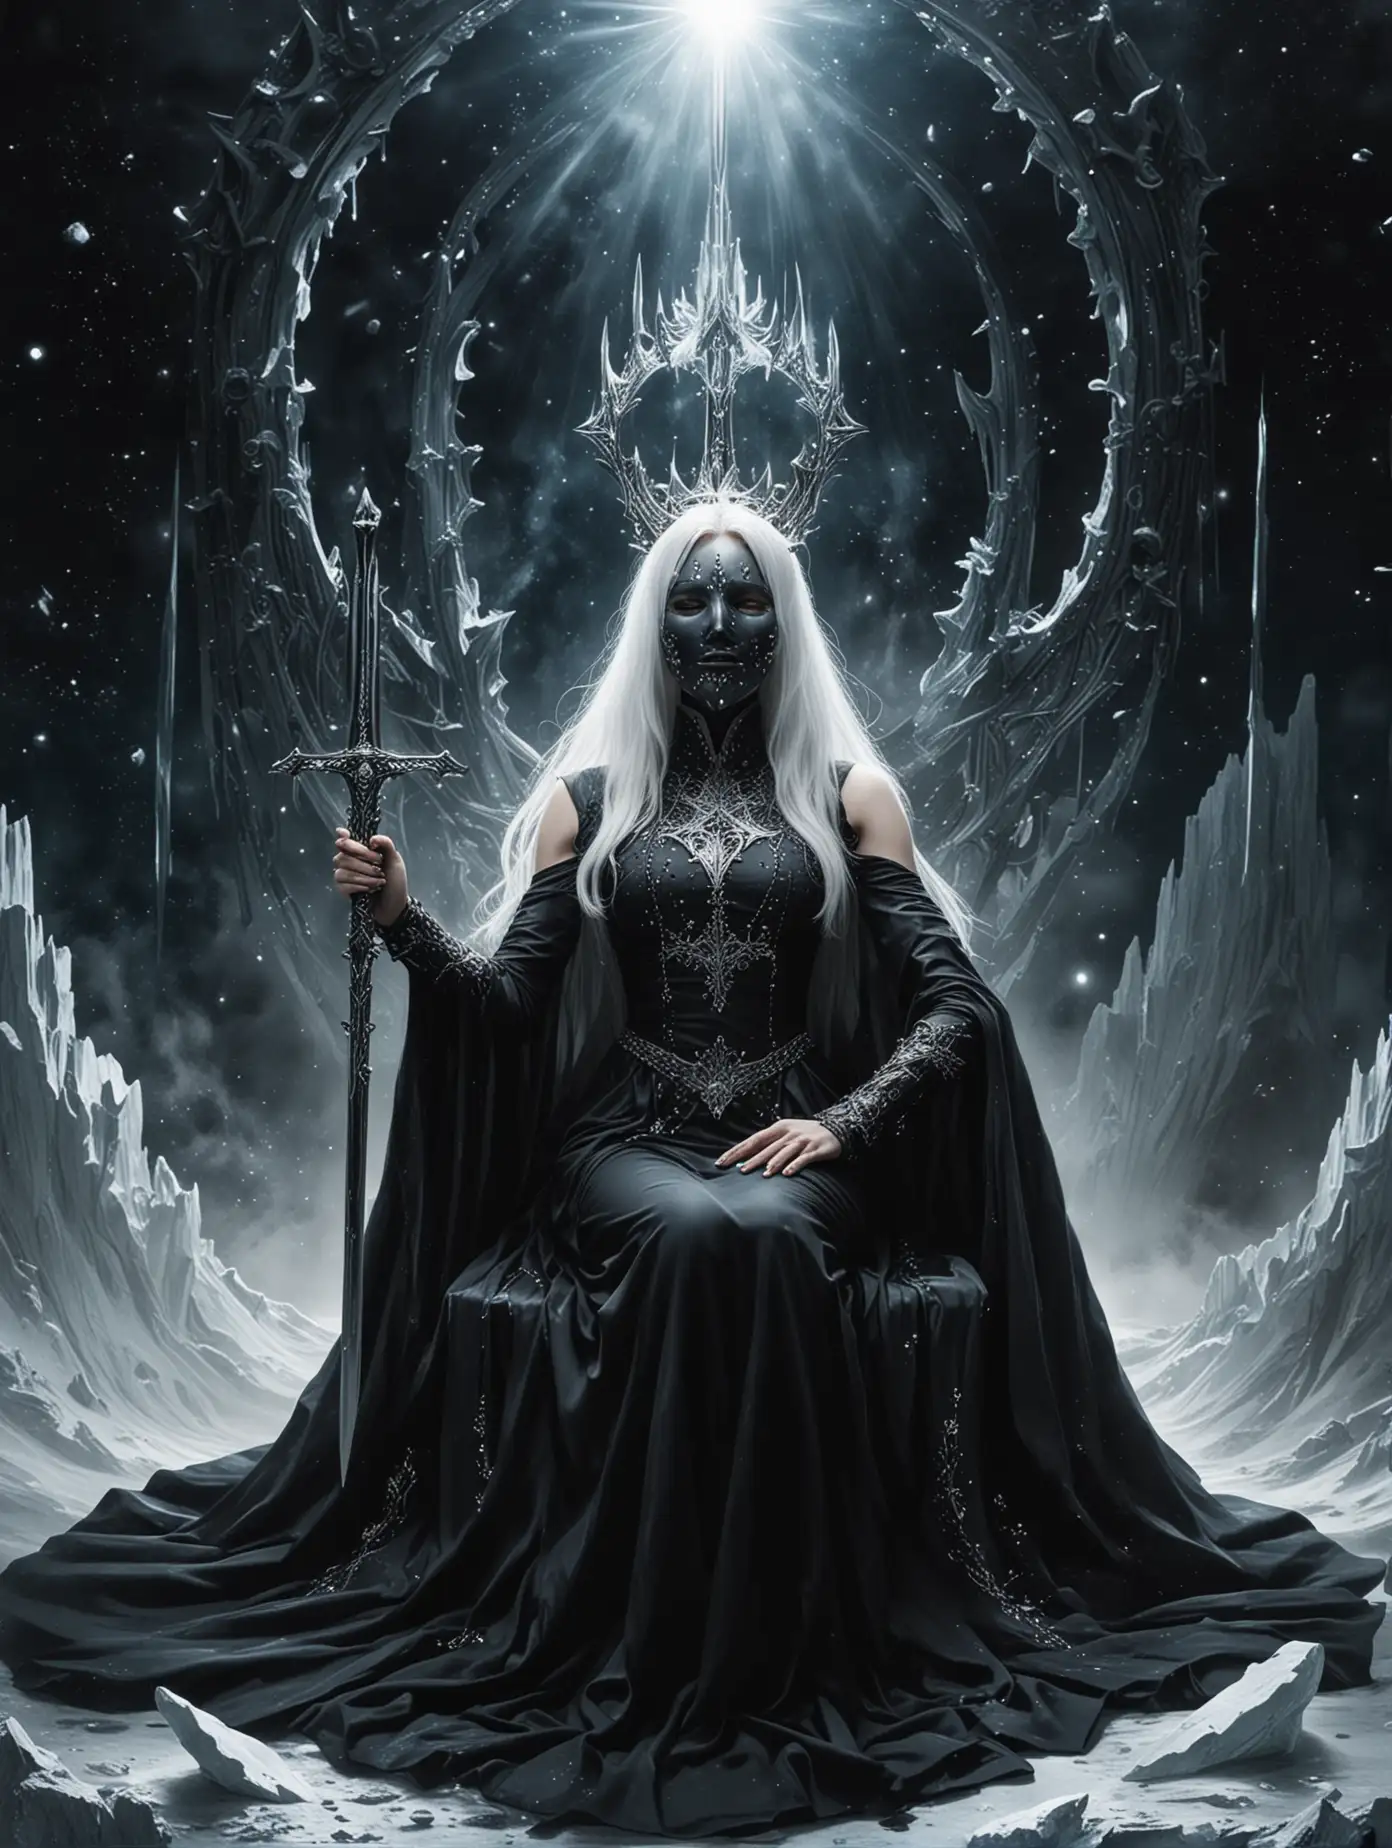 Icy-Queen-Sister-Hessert-on-Cosmic-Throne-with-Sword-and-Silver-Accents